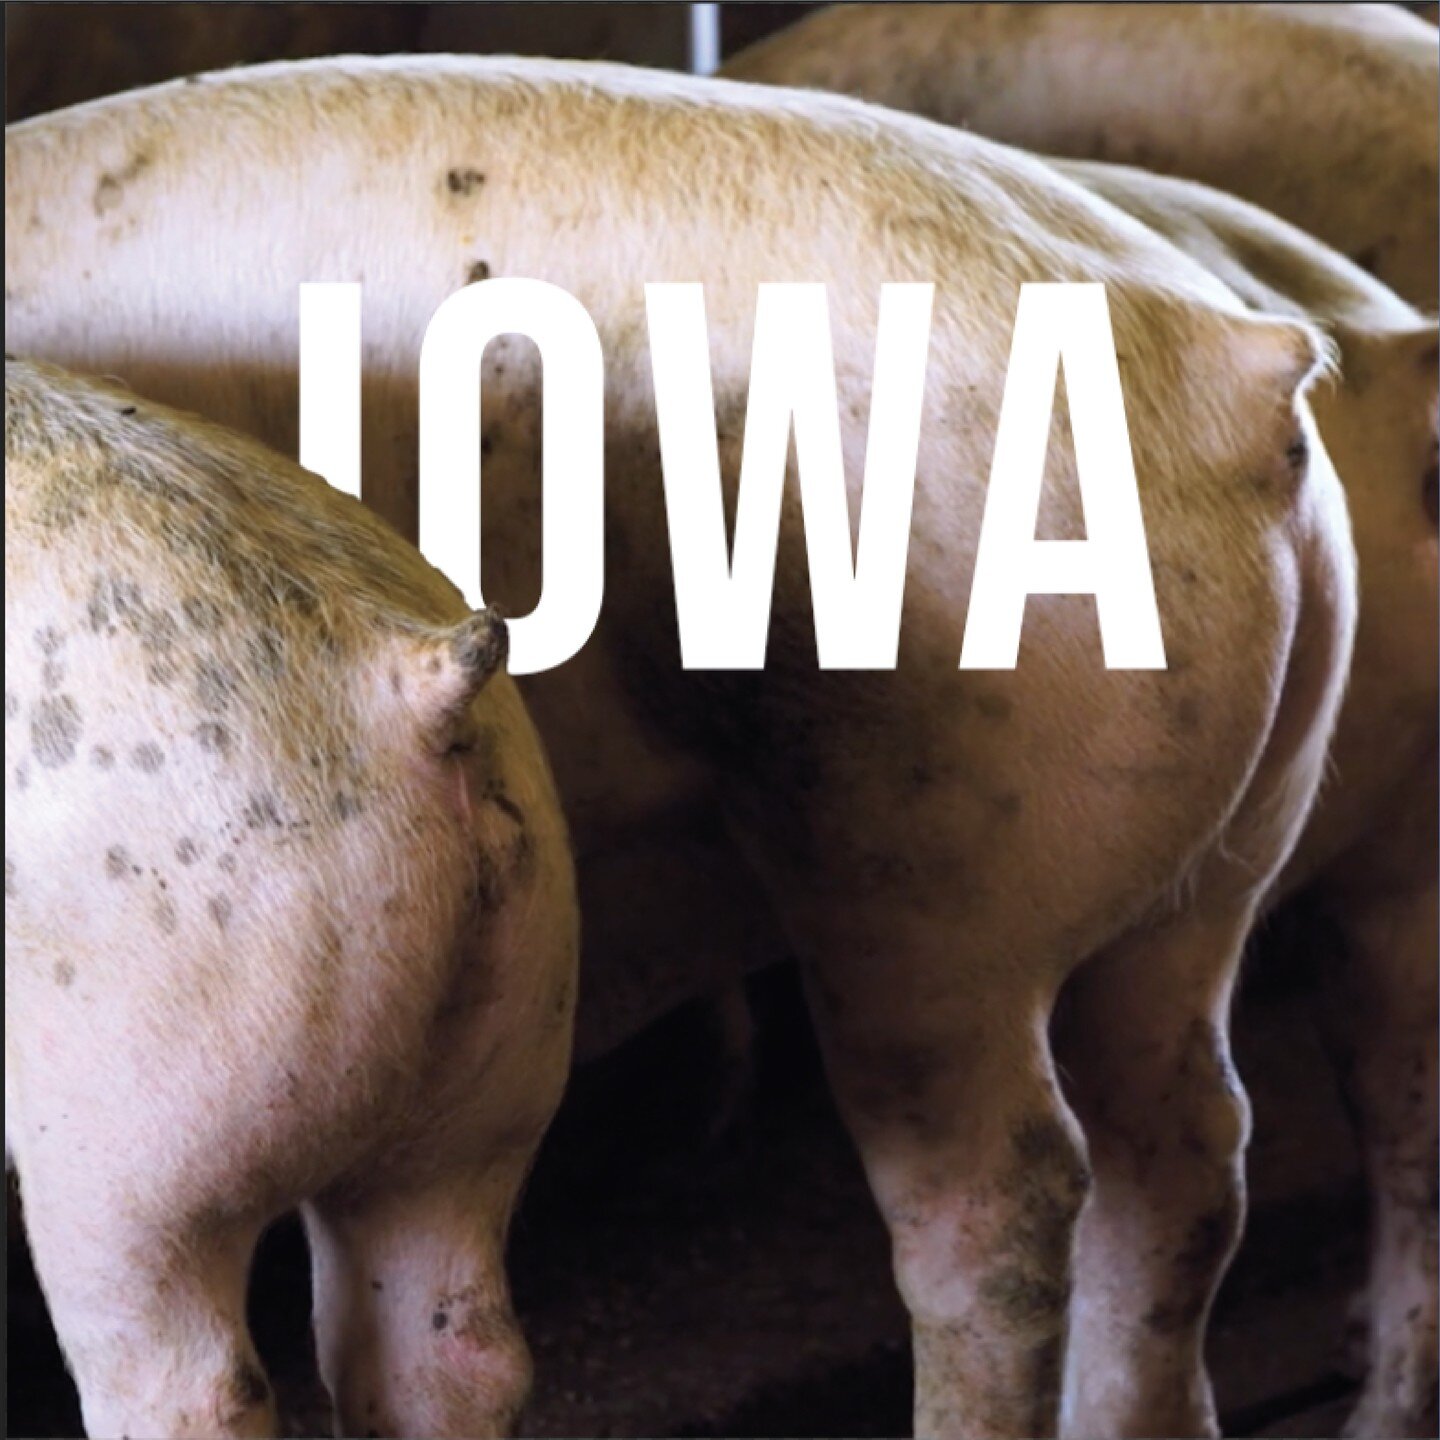 Hogs outnumber Iowa&rsquo;s population by around 22 million which means that Iowa has a manure problem. Iowa&rsquo;s hogs produce 12 billion pounds of sh*t per year. Watch WASTELAND: IOWA &amp; see what the wholesome agriculture narrative has done to